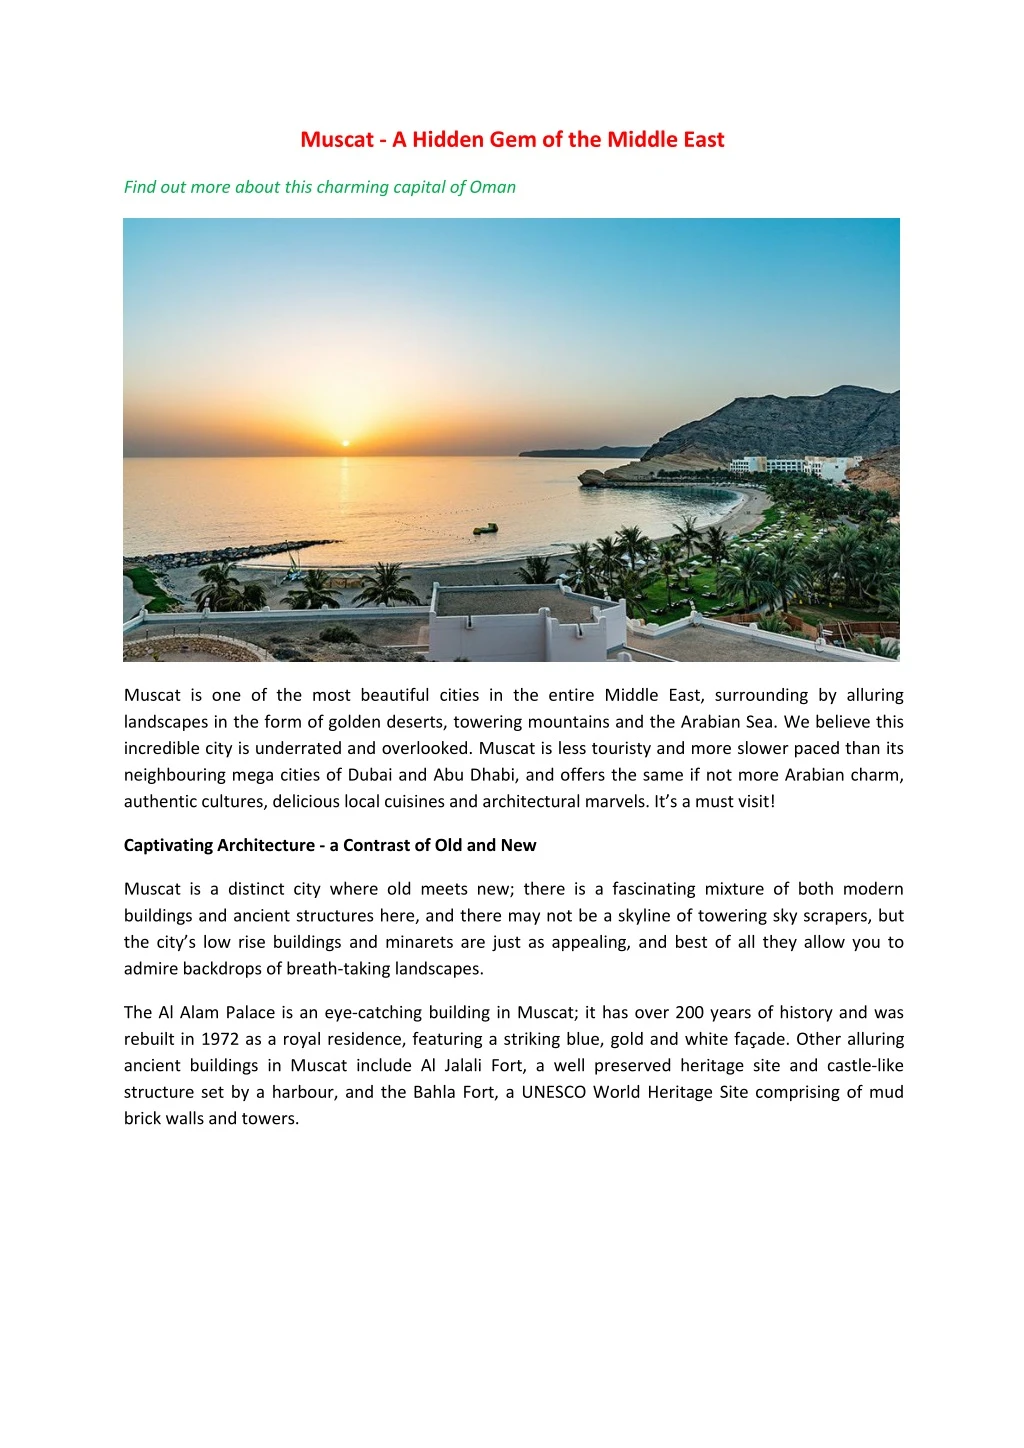 muscat a hidden gem of the middle east